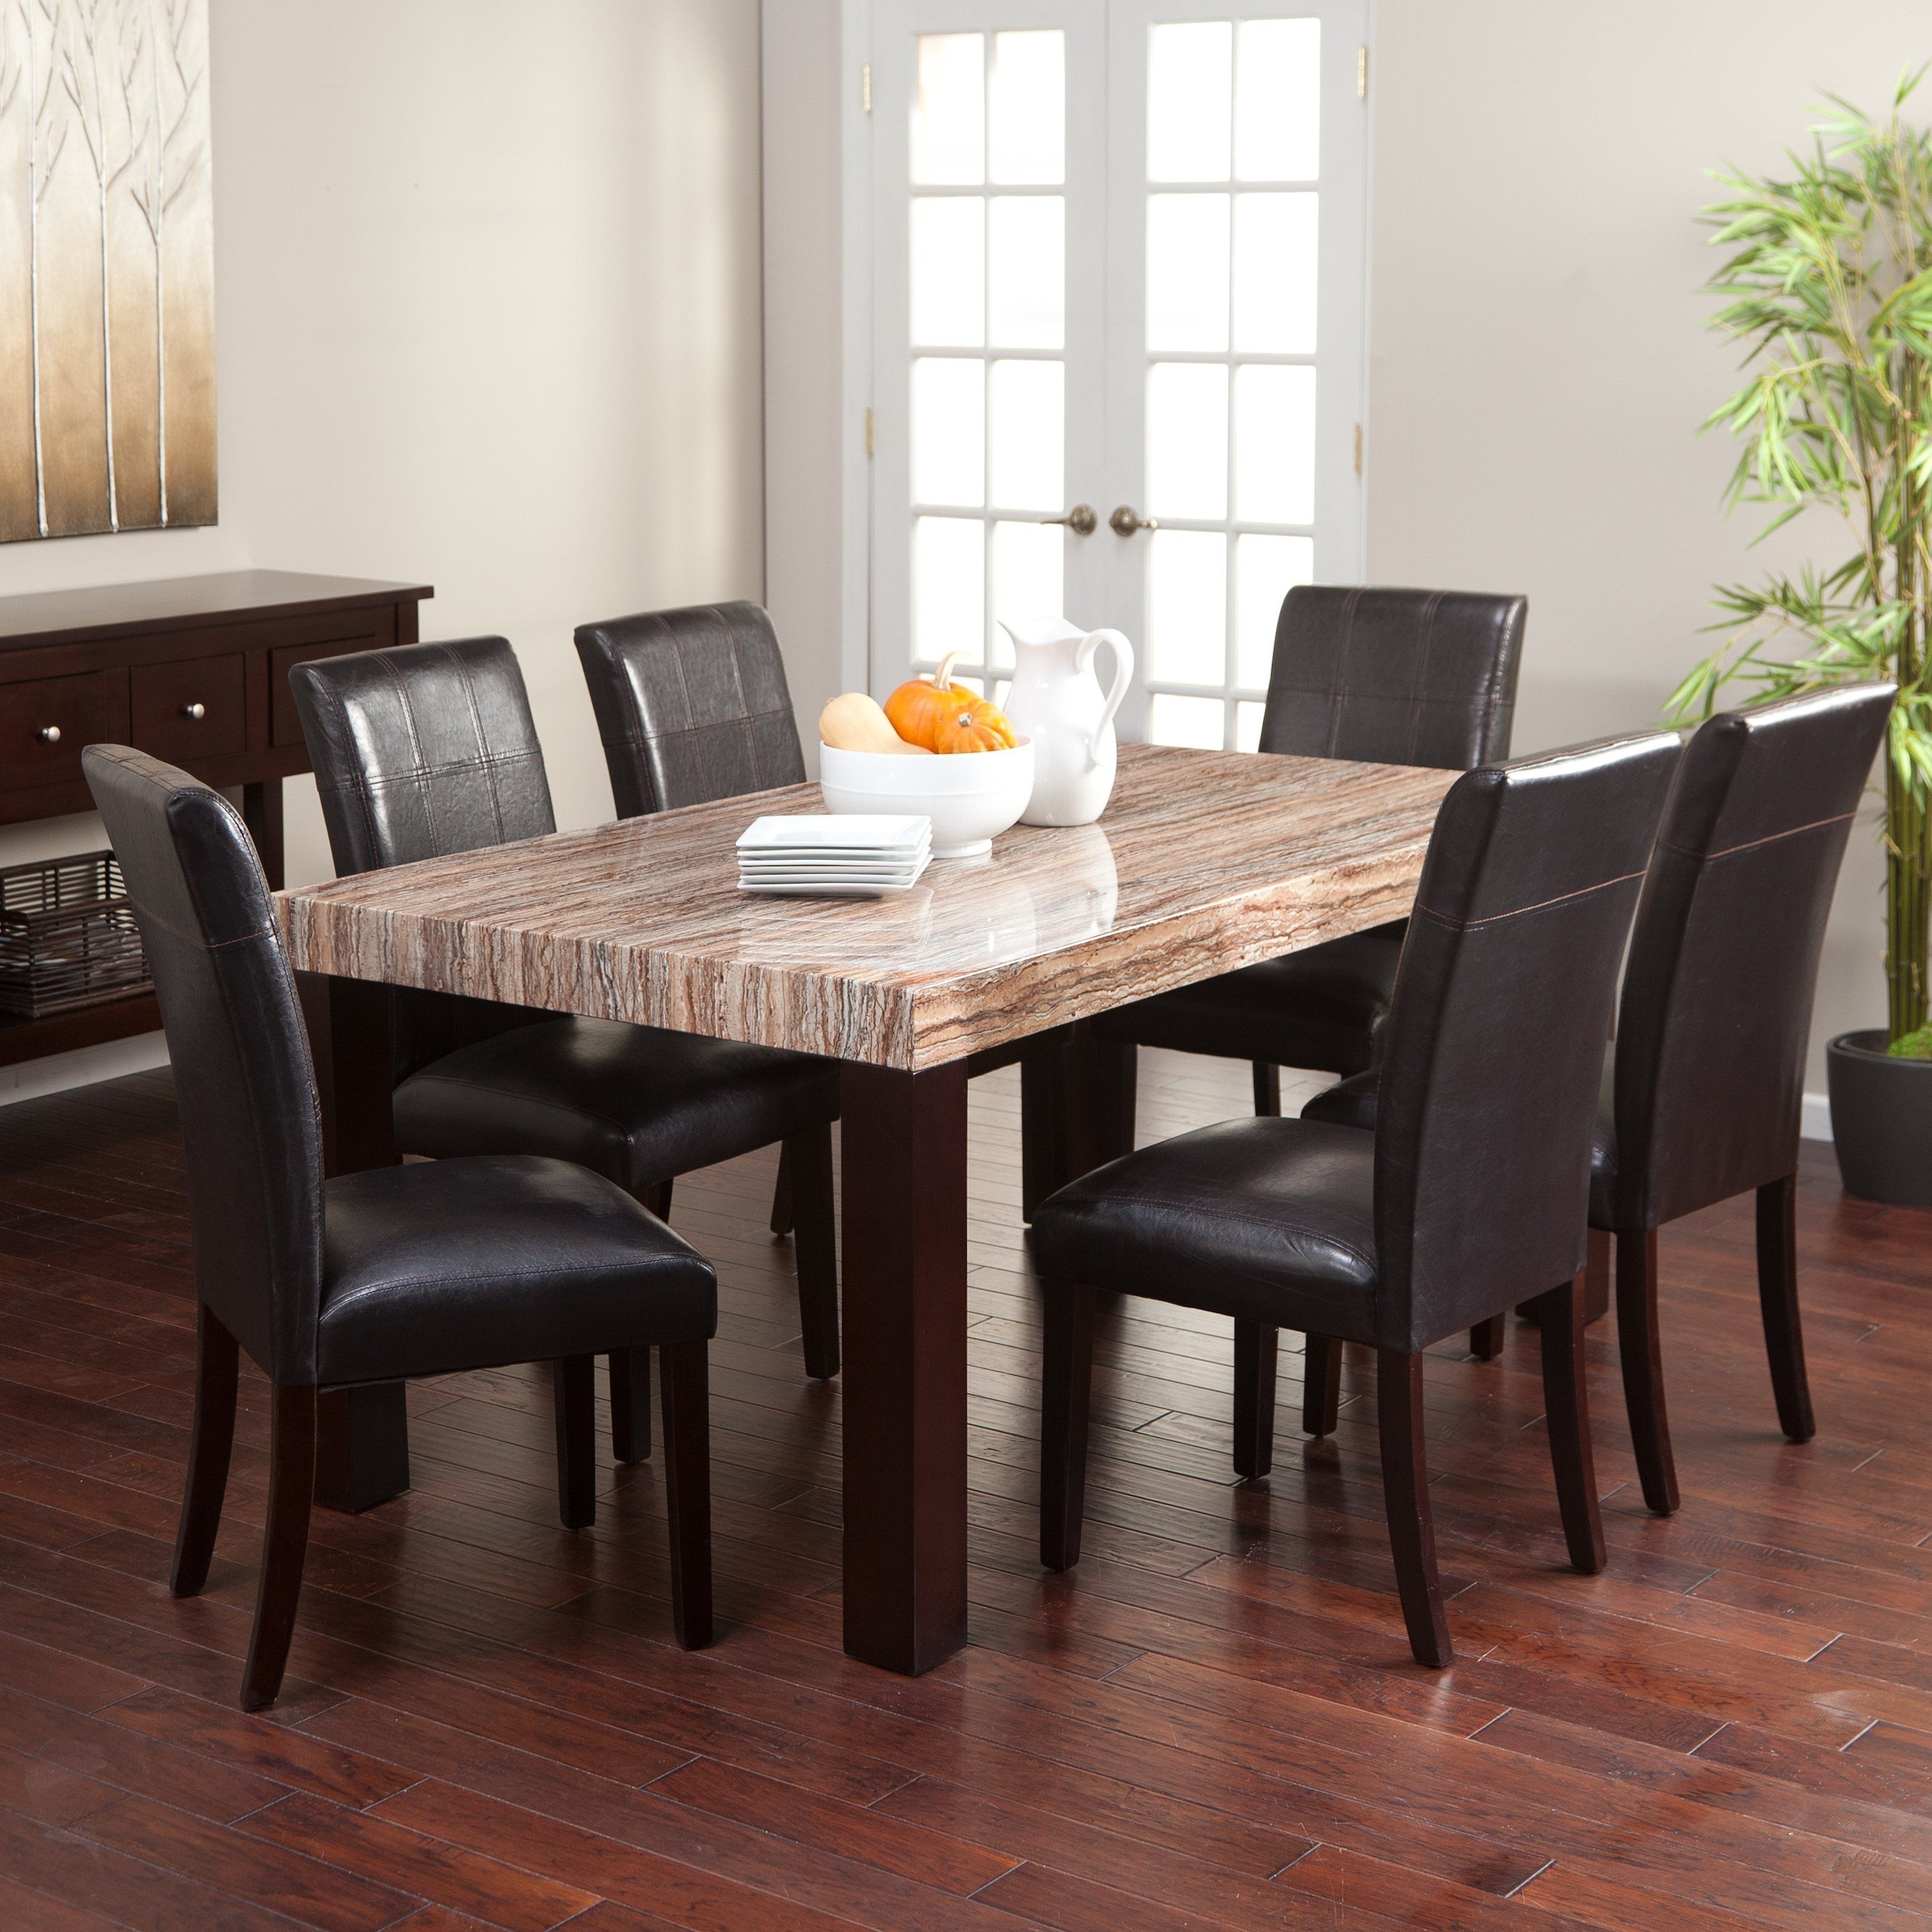 Carmine 7 Piece Dining Table Set – With Its Creamy Caramel Colored With Regard To 2018 Parquet 7 Piece Dining Sets (Photo 6 of 20)